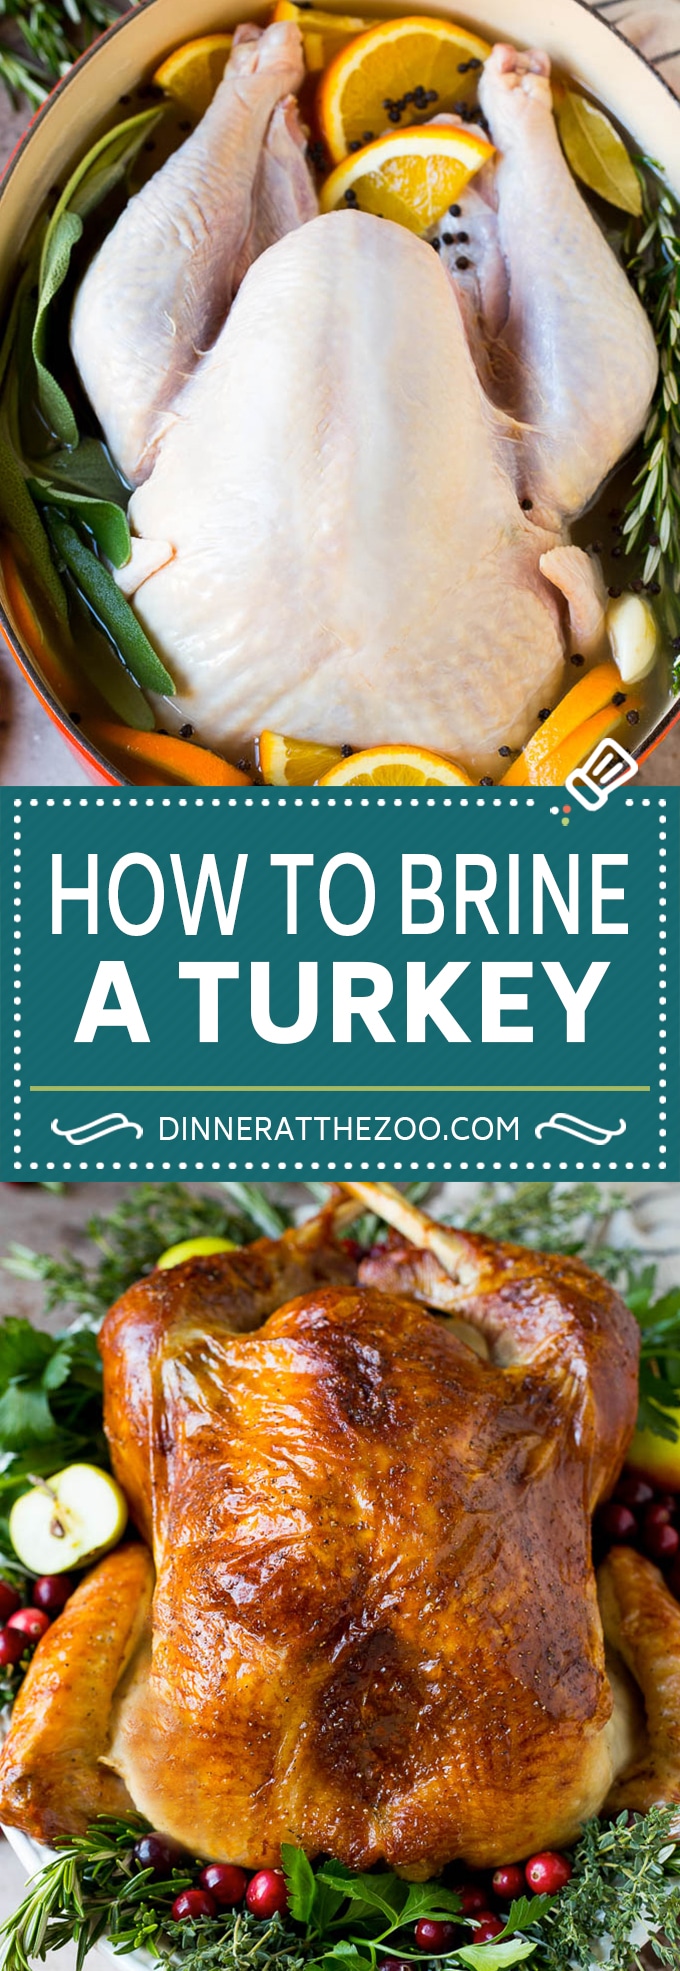 This is a complete guide on how to brine a turkey to get the most tender and flavorful bird each and every time.